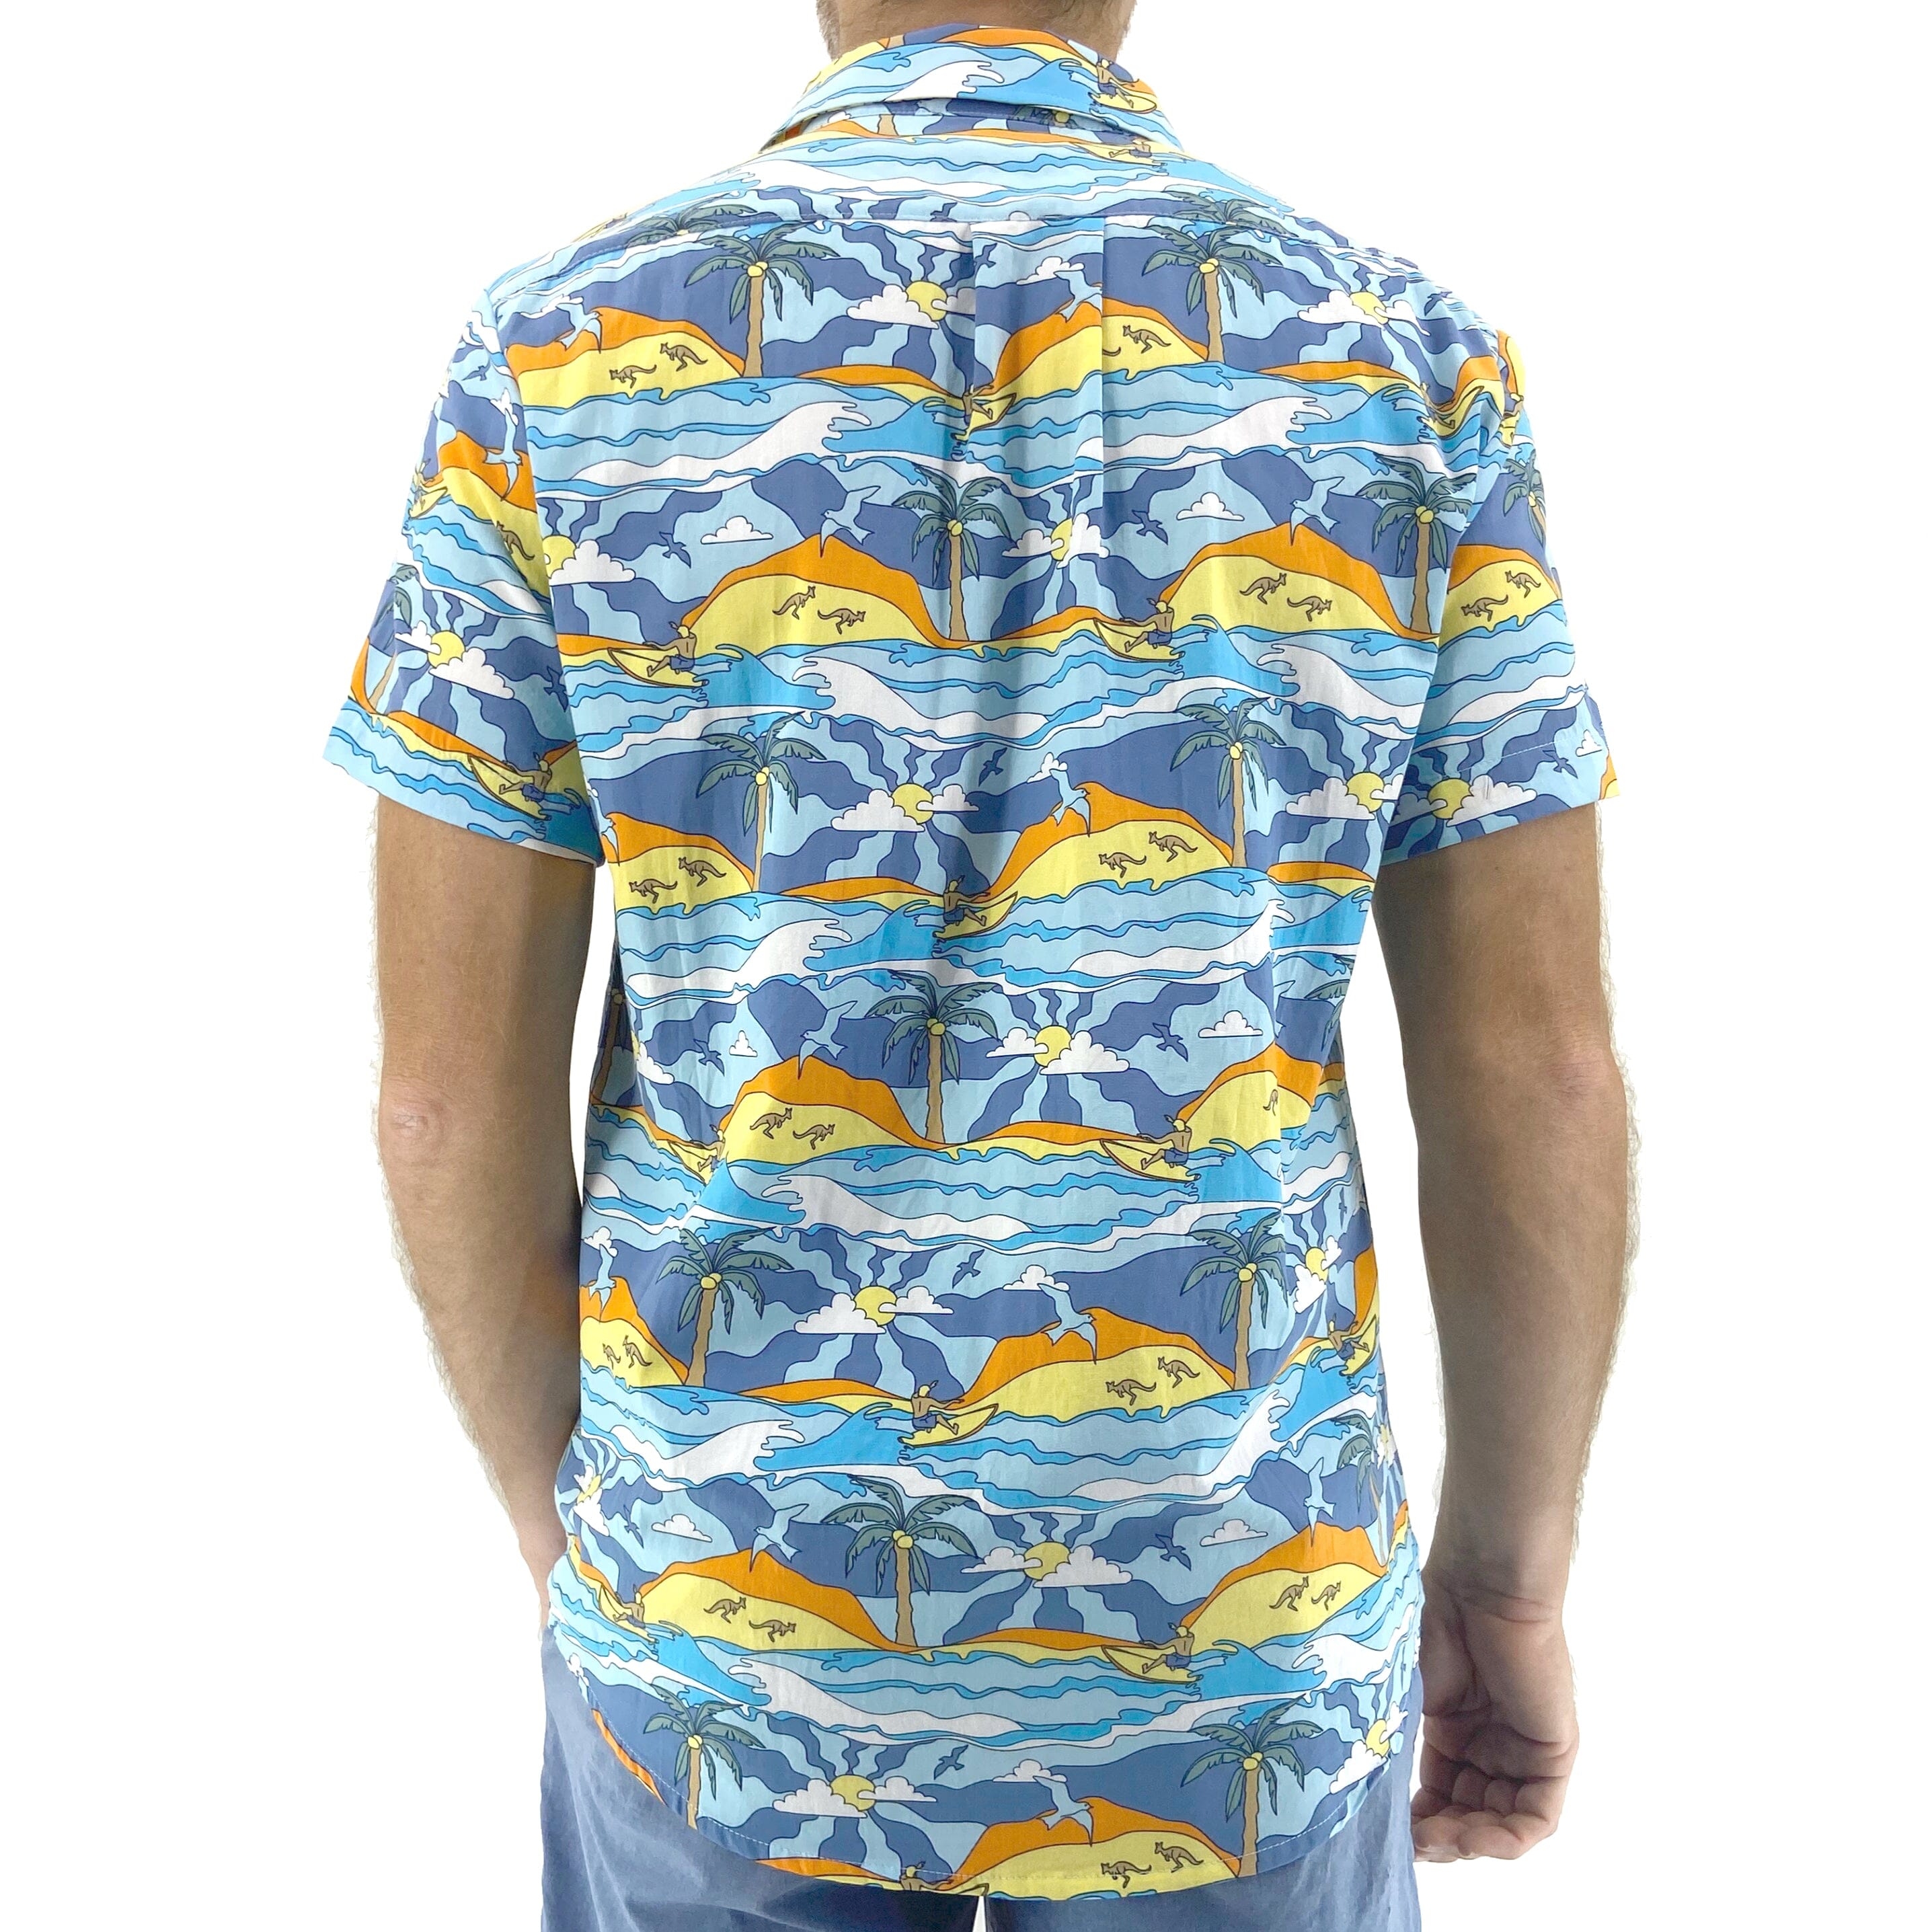 Men's 60's Inspired Trippy Surfer Patterned Button Down Hawaiian Shirt